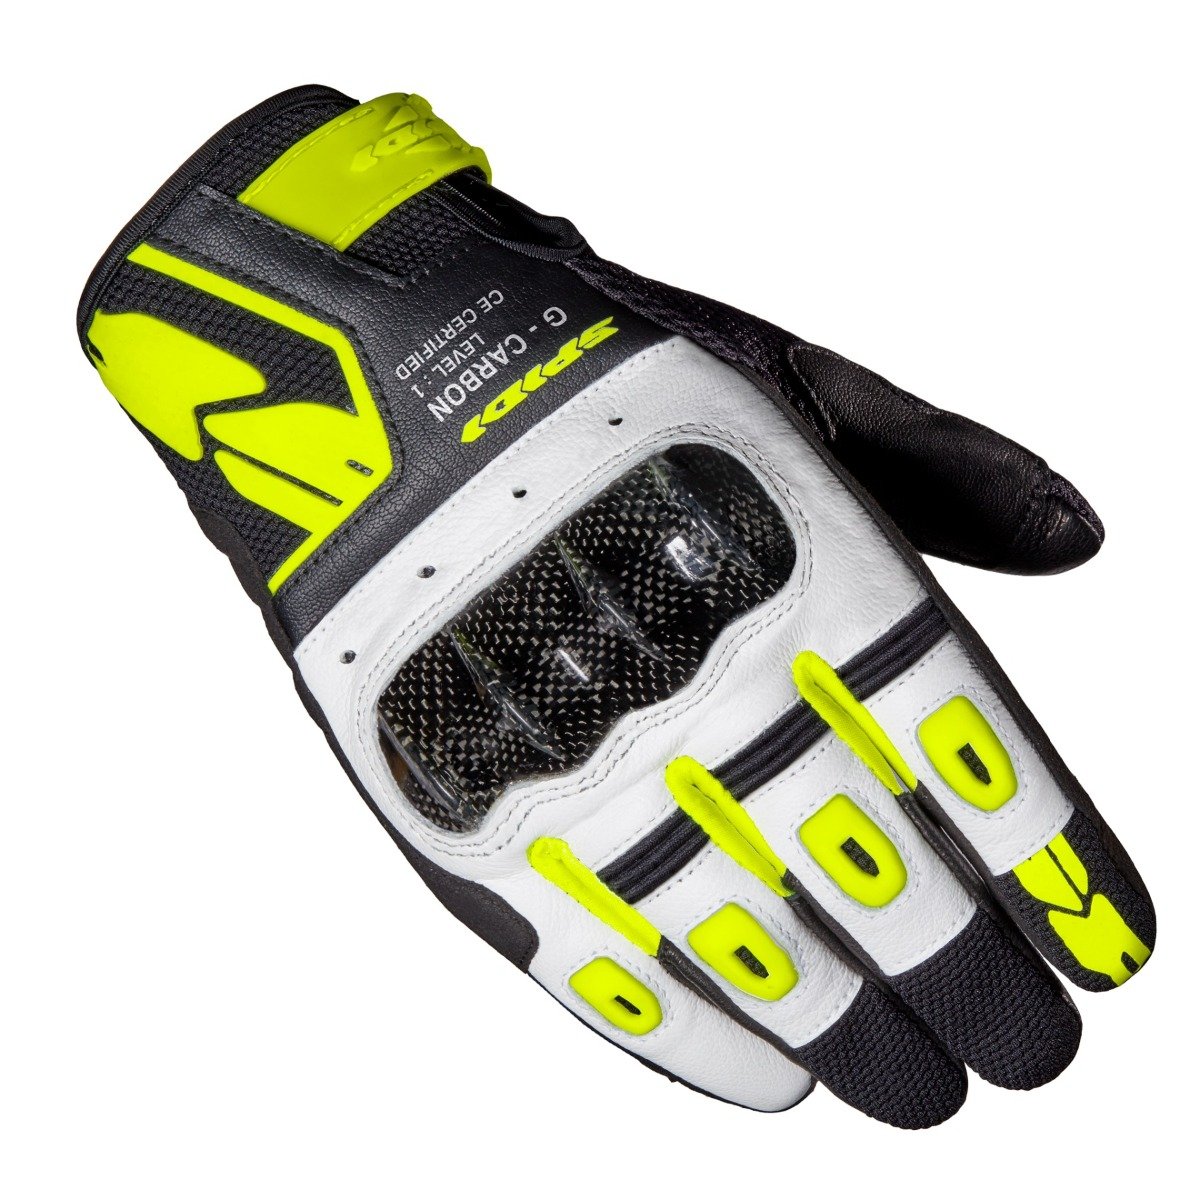 Image of Spidi G-Carbon Black Fluo Yellow Size 3XL ID 8030161314915